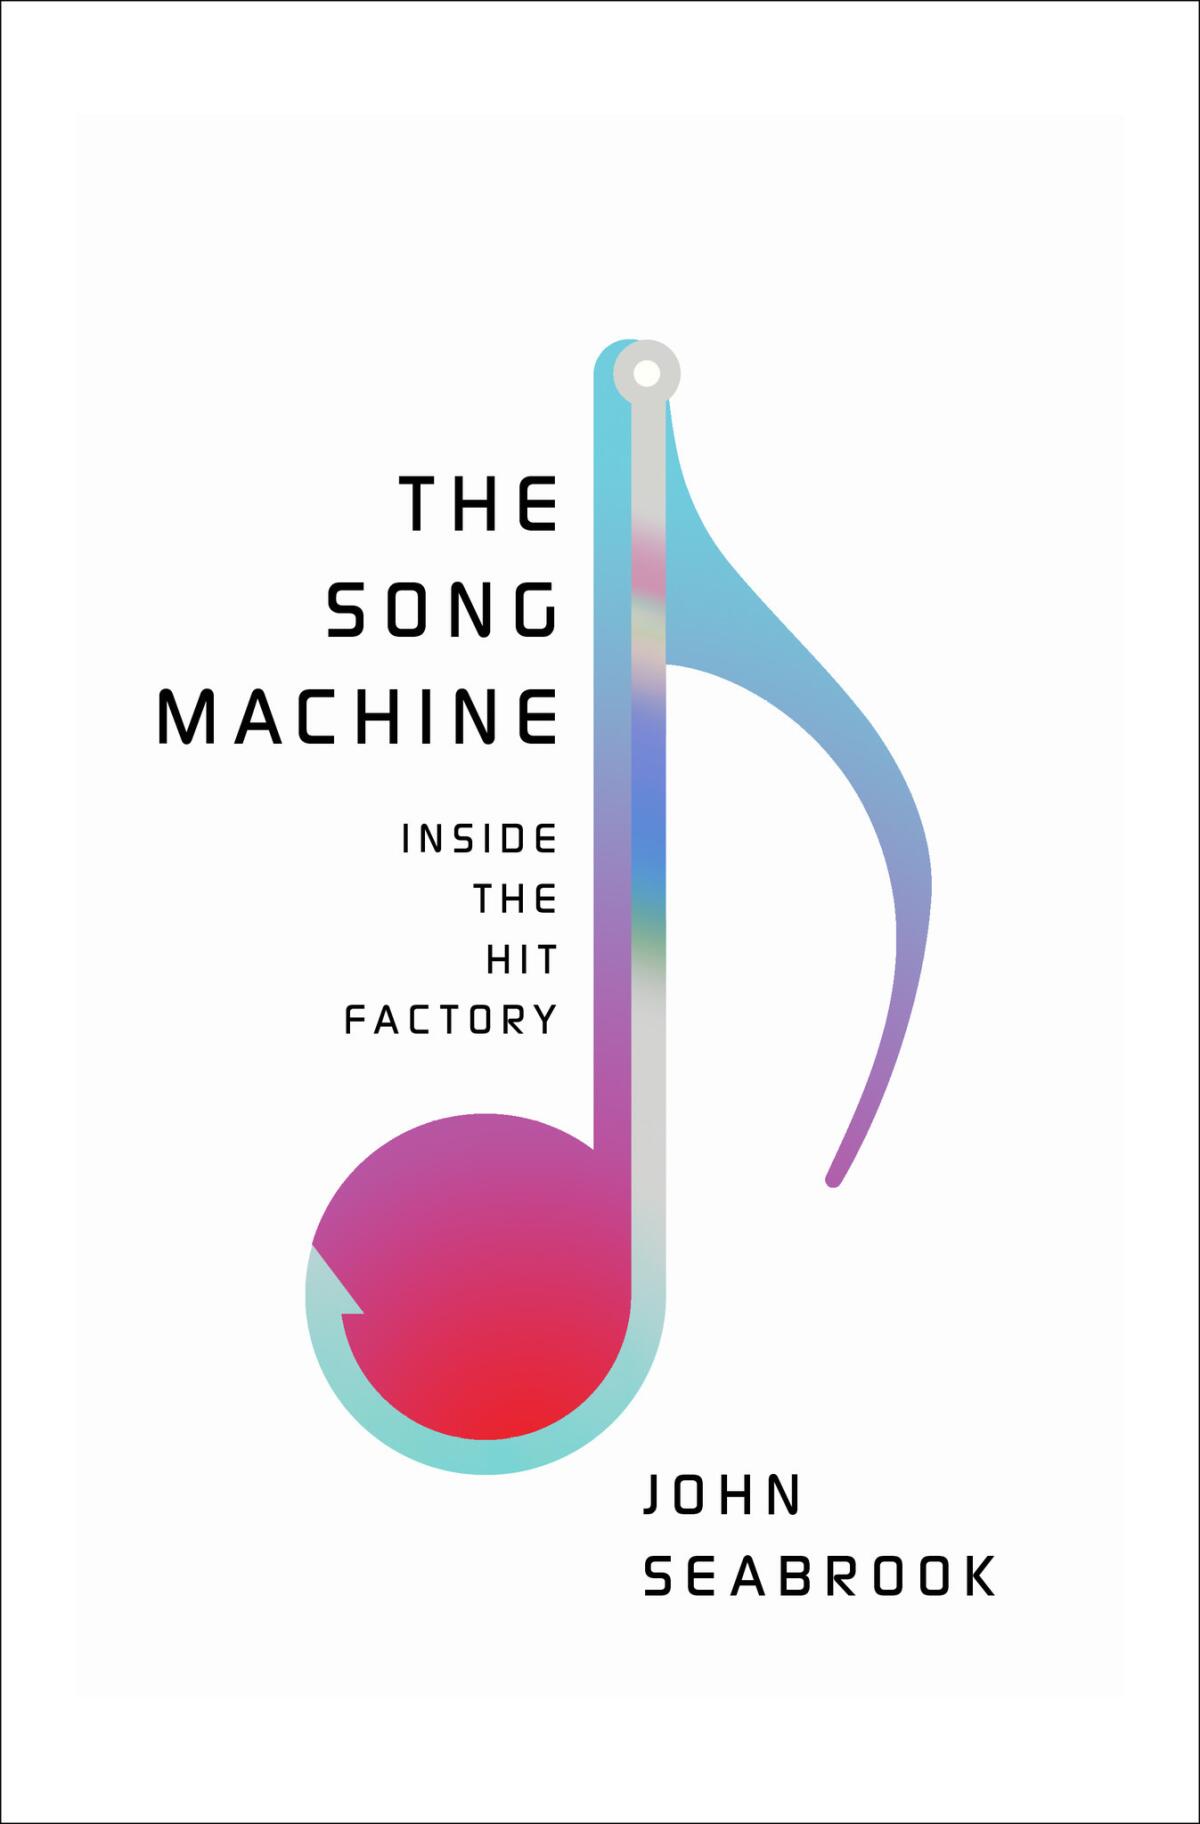 "The Song Machine" by John Seabrook